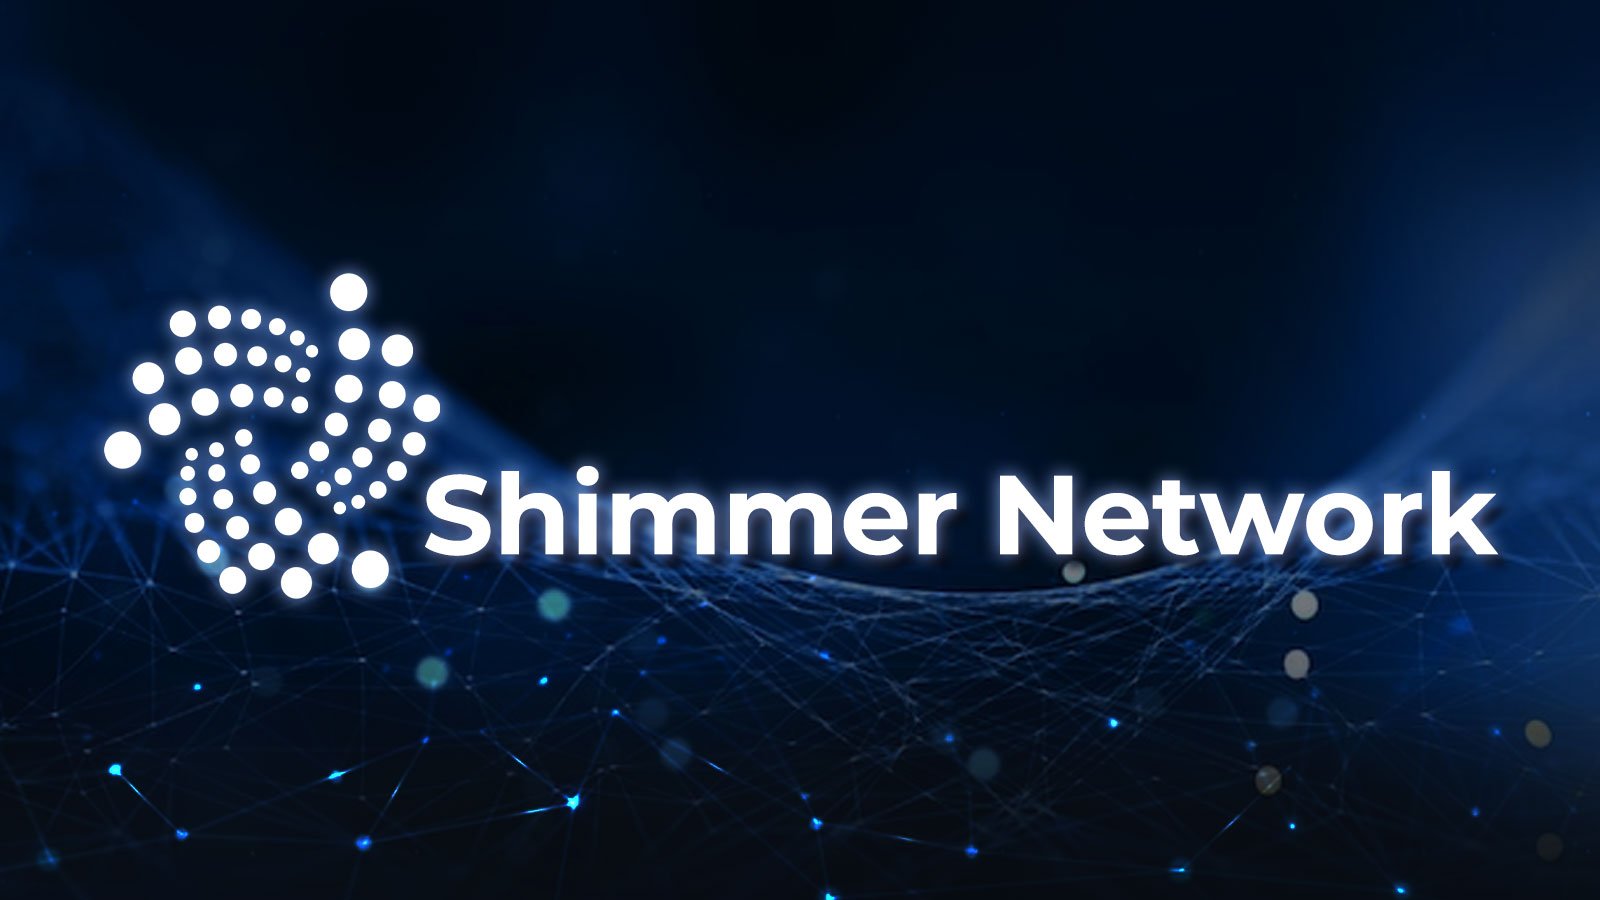 IOTA’s Shimmer Network Officially Launches: Details